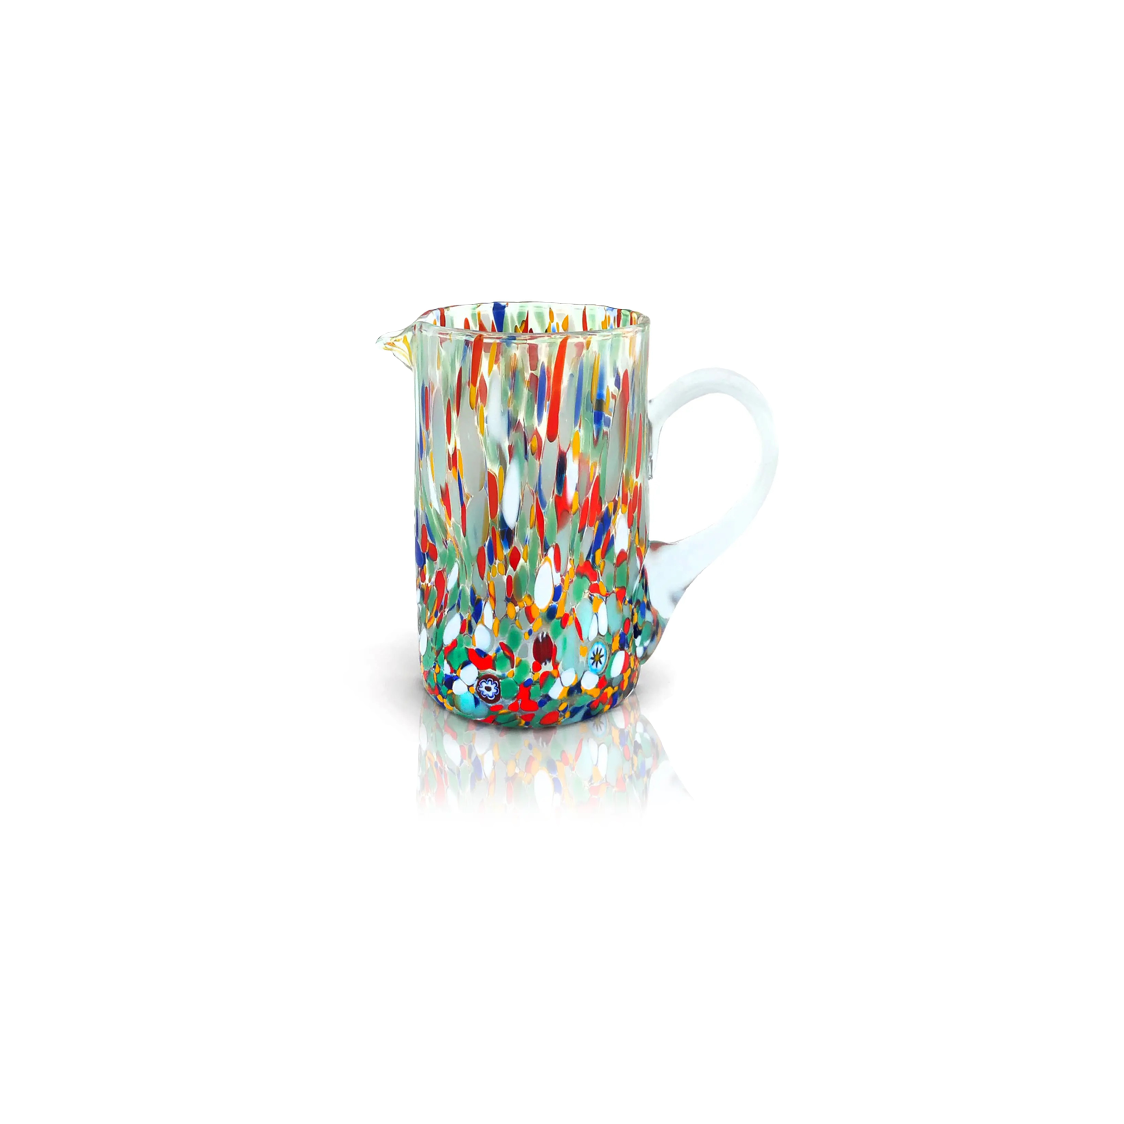 small glass jug with colourful splatters in white, blue, green, yellow and red